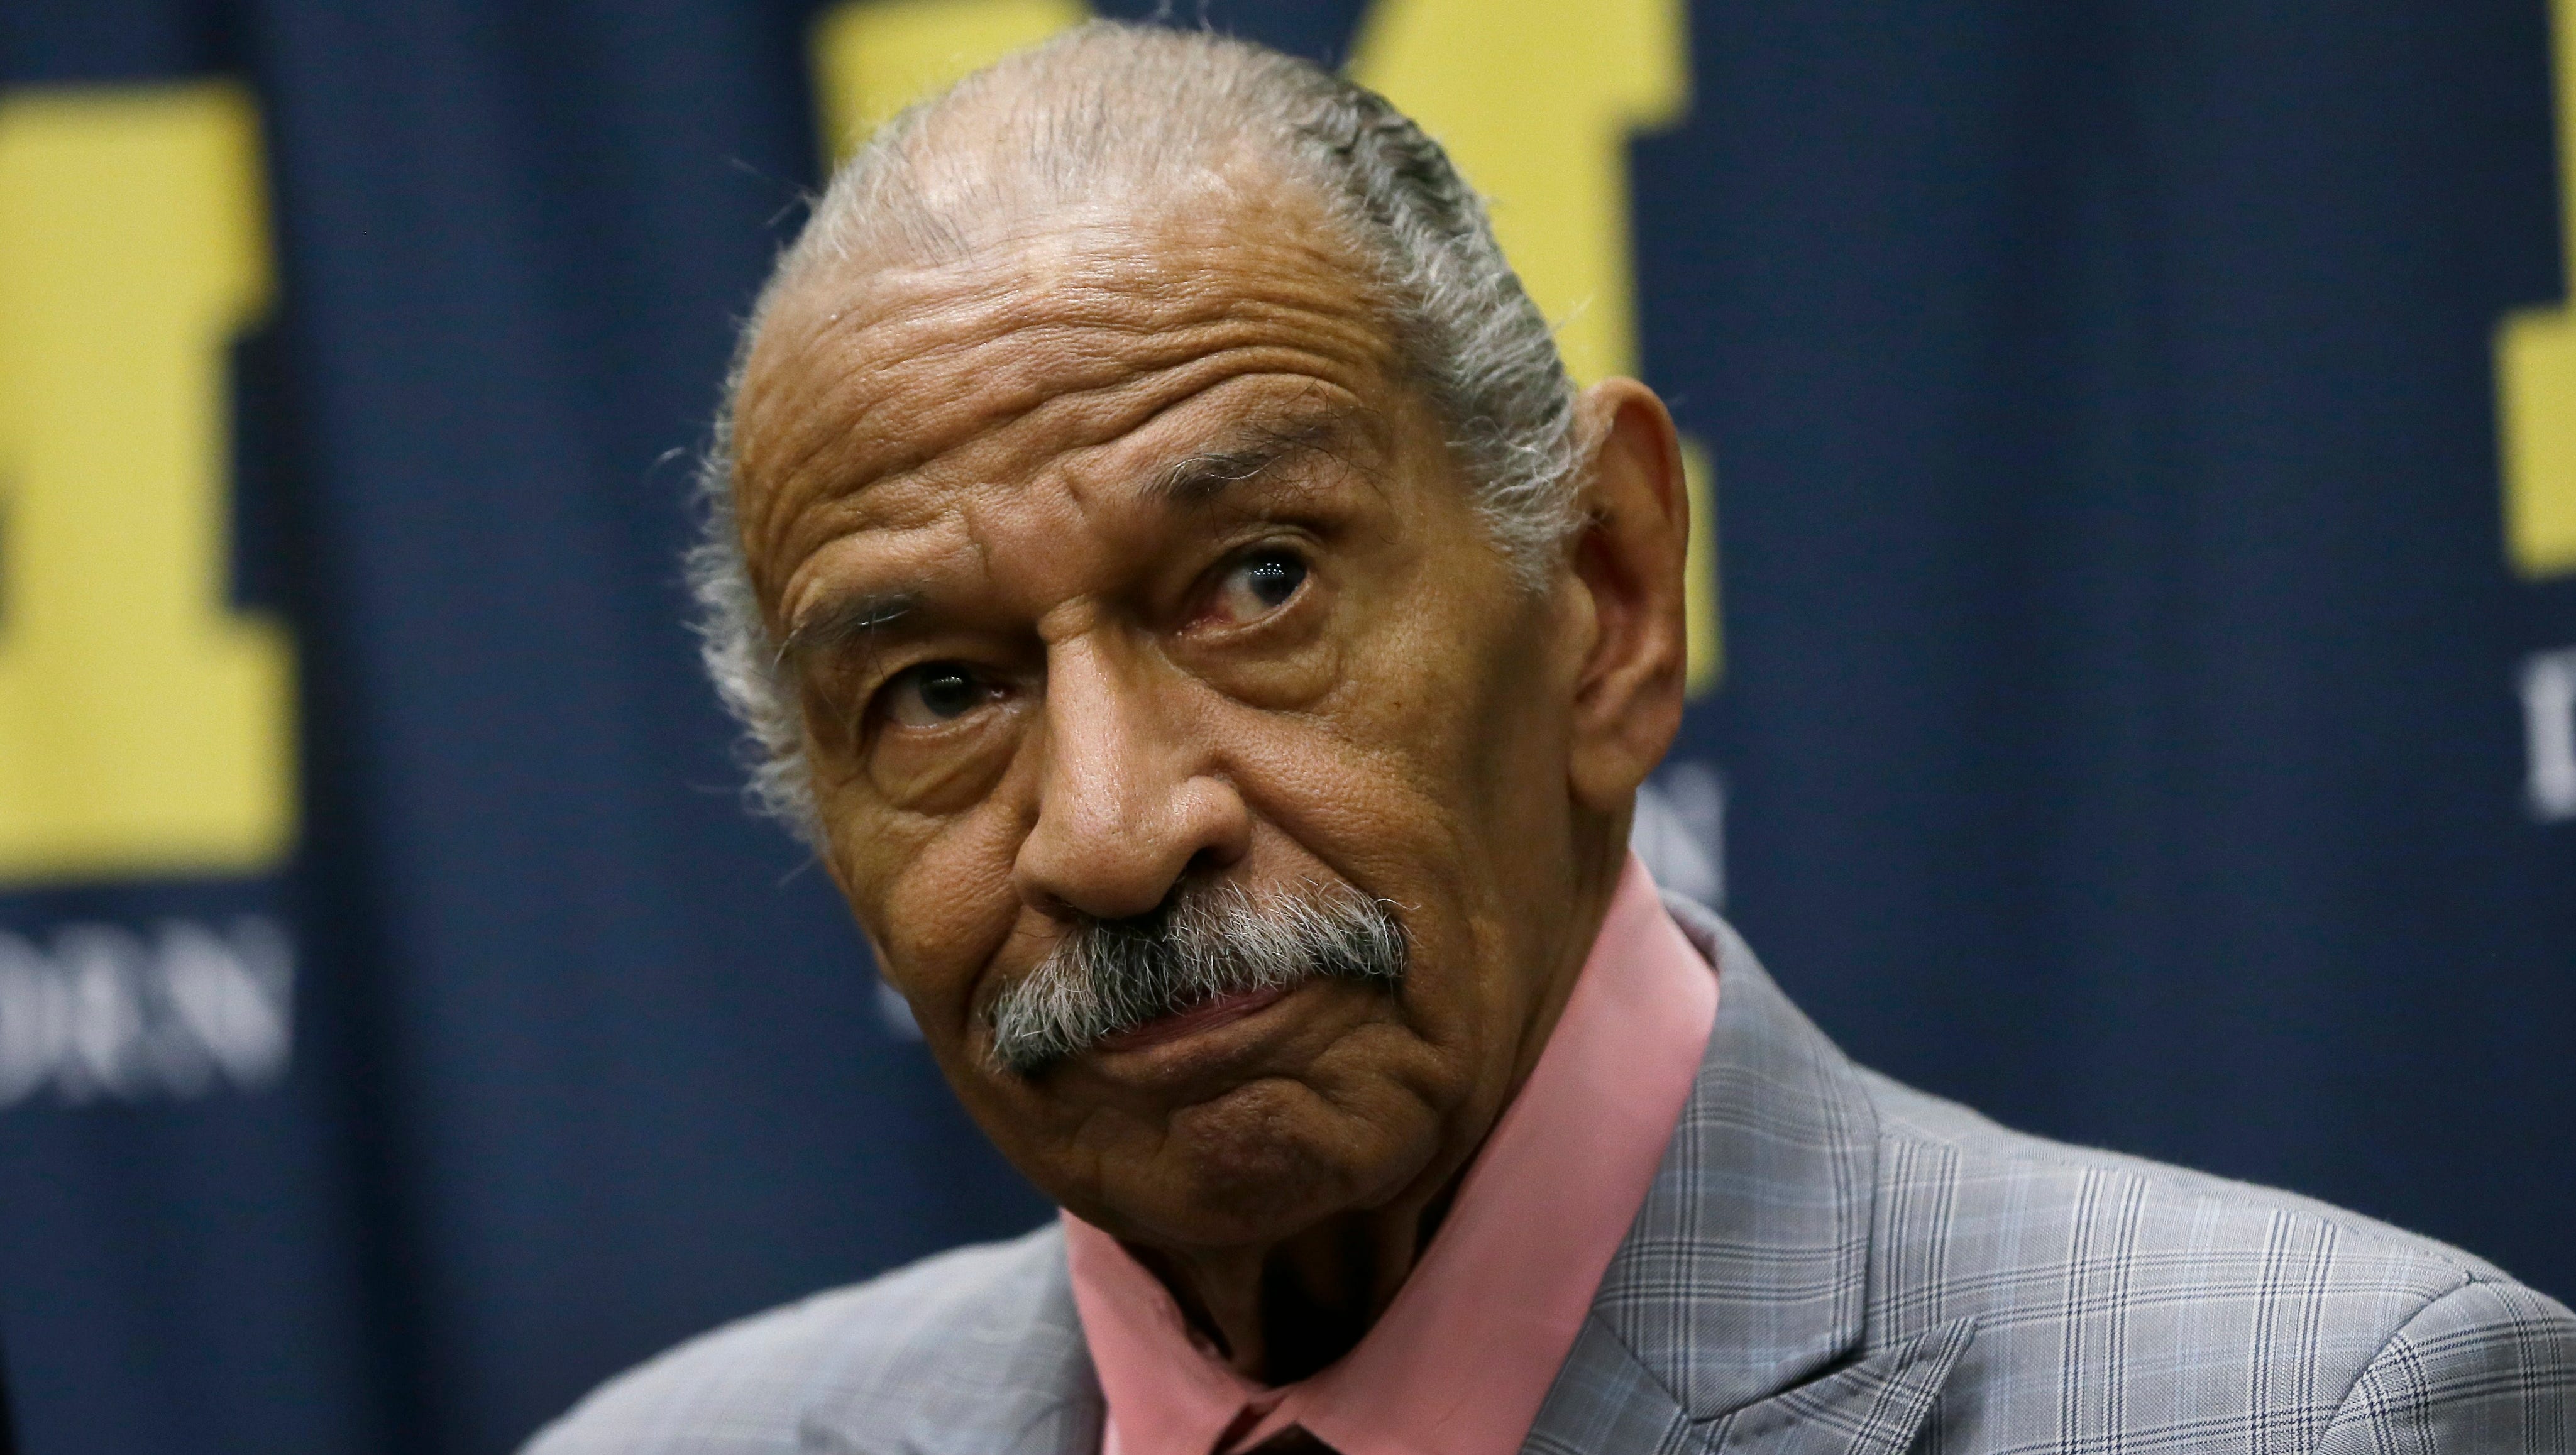 In November 2017, two former staffers go public and accuse the 88-year-old lawmaker of making unwanted sexual advances, prompting an investigation by the House Ethics Committee. Conyers denies the accusations.